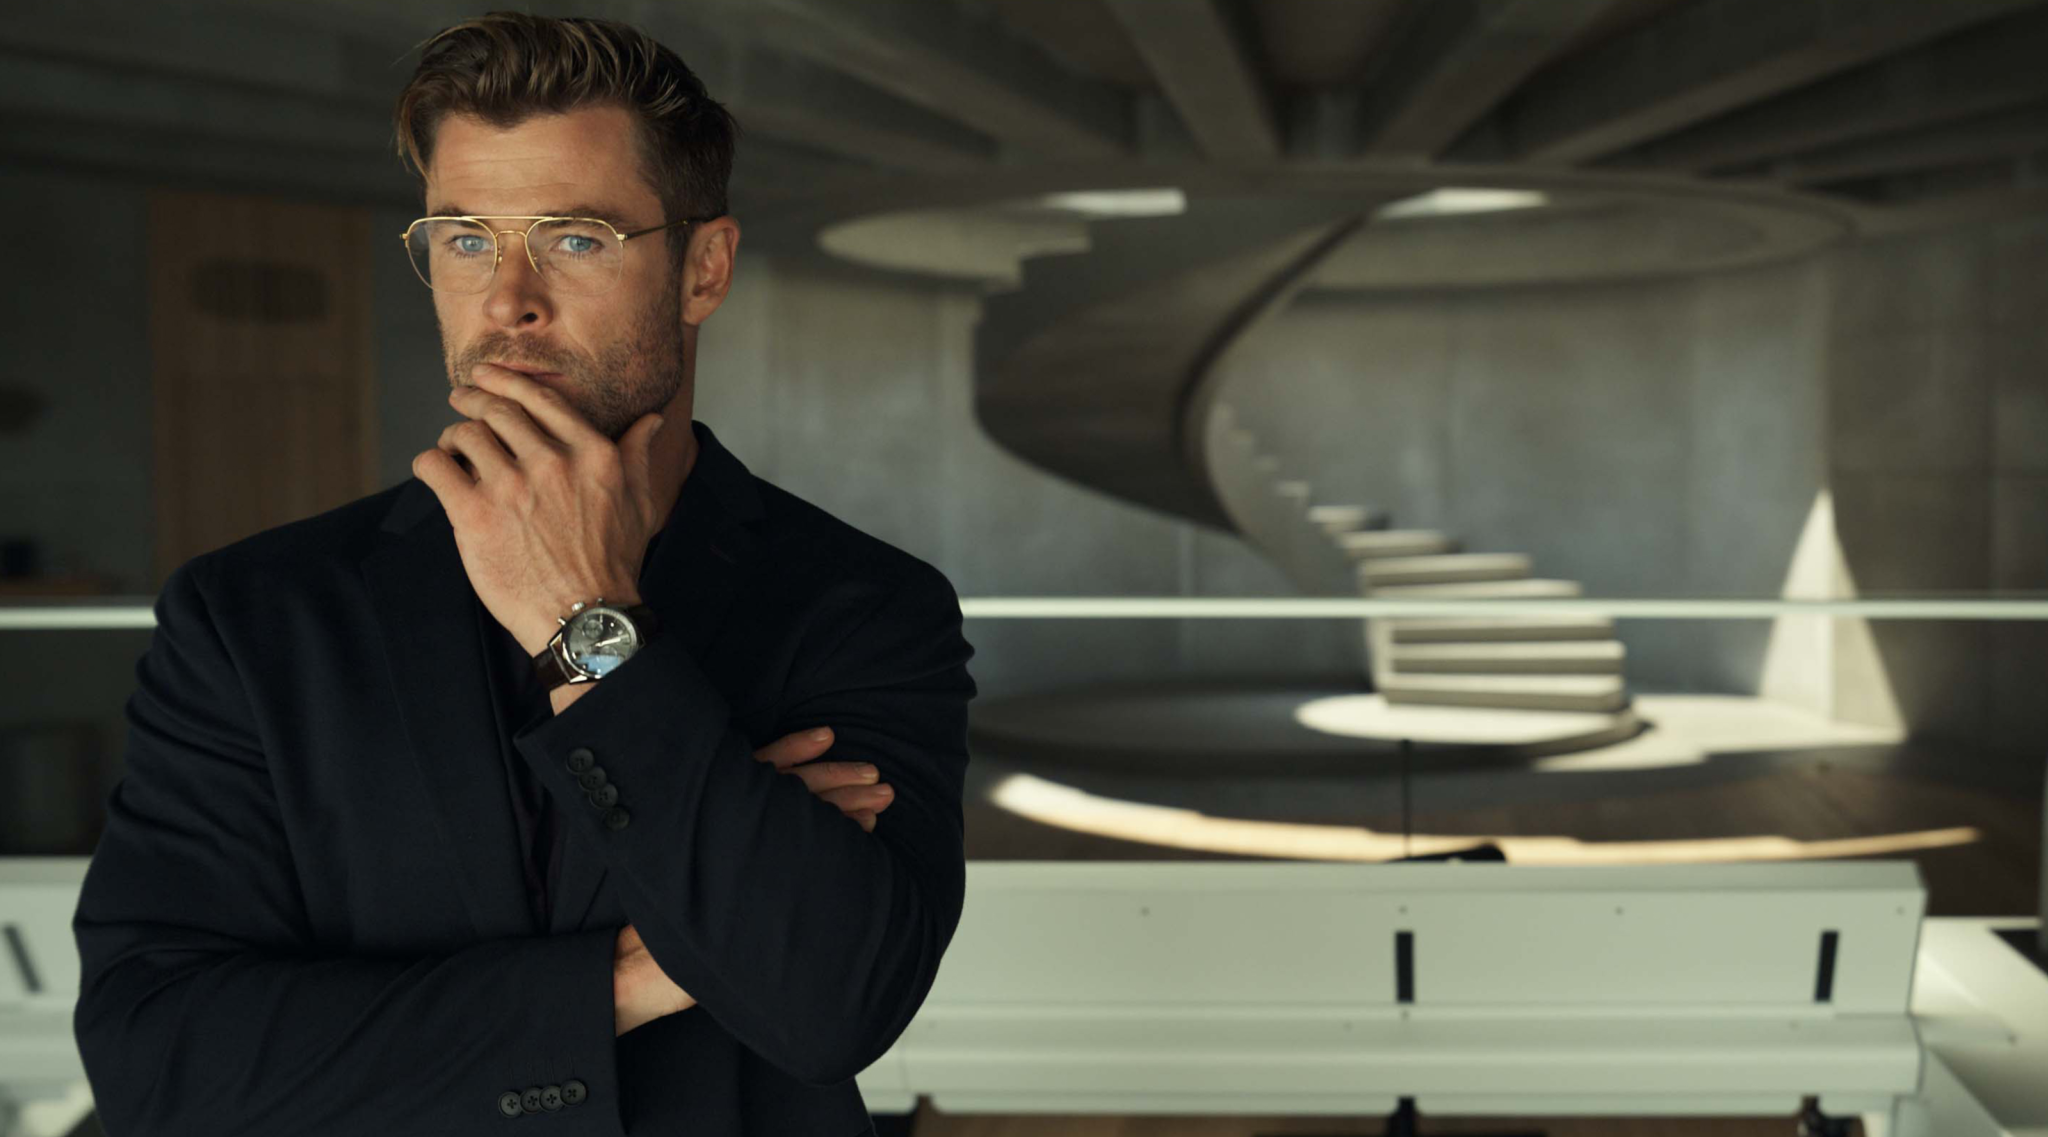 Chris Hemsworth Goes Full Mad Scientist in the First Trailer for Sci-Fi Flick 'Spiderhead'